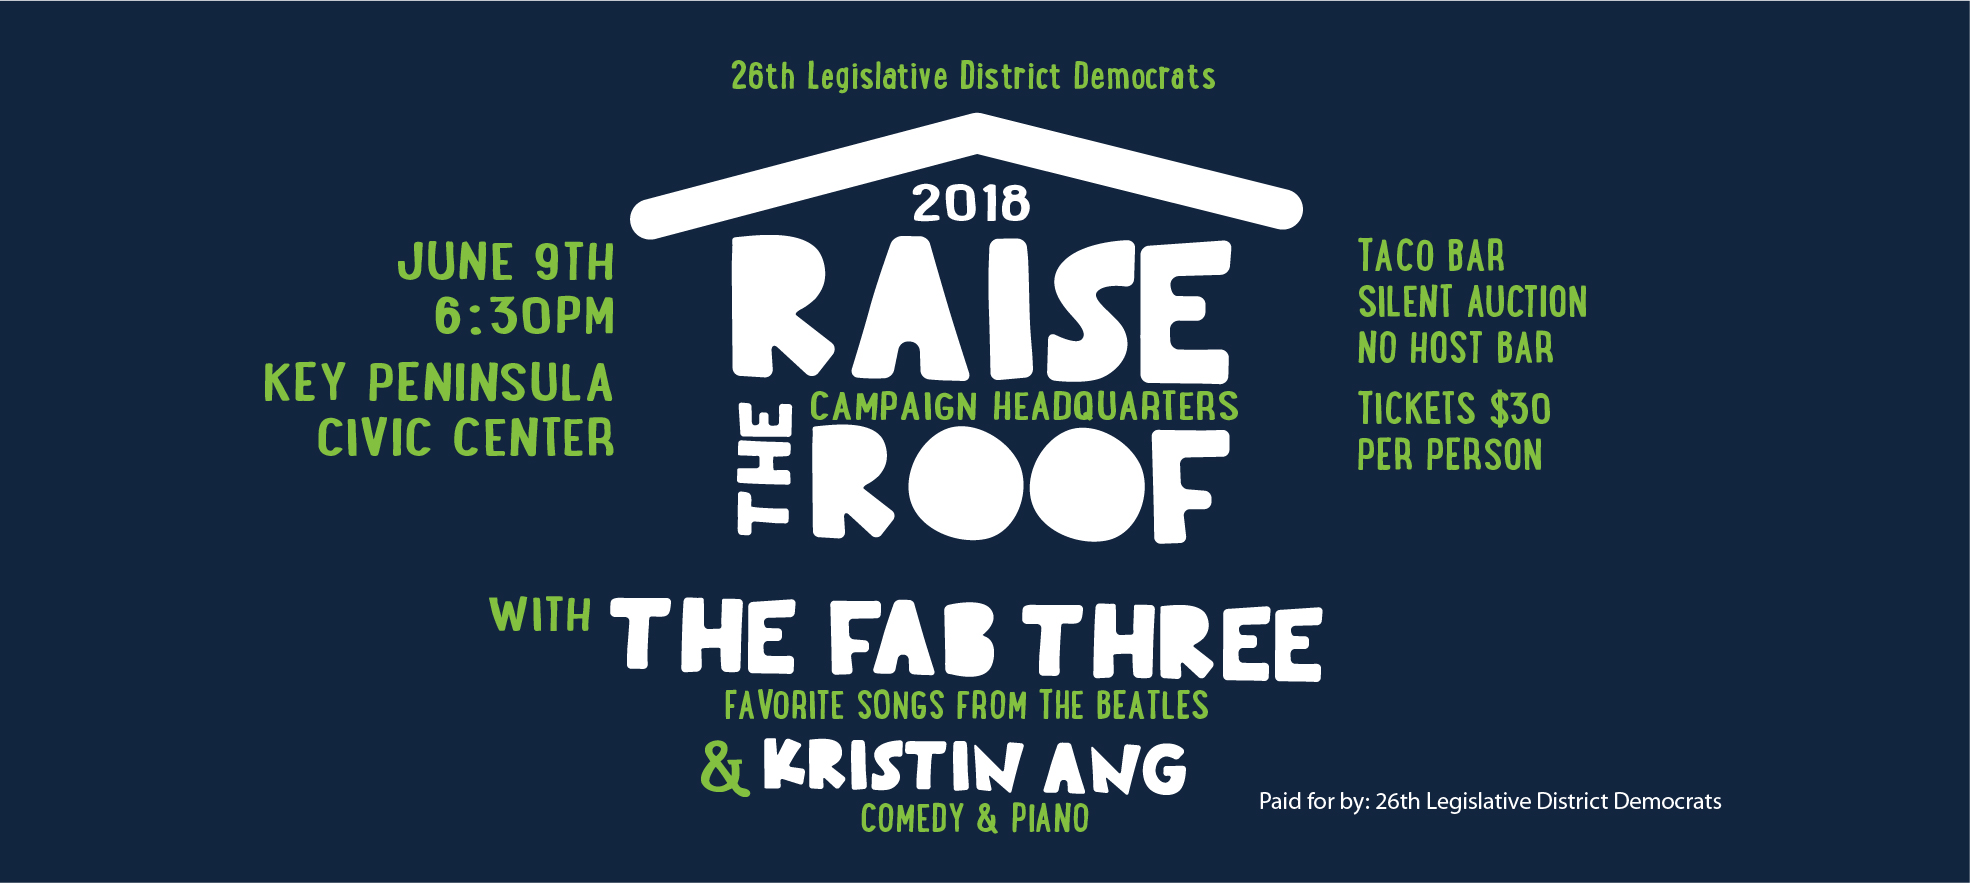 WHAT A GREAT EVENT! THANK YOU EVERYONE FOR YOUR SUPPORT!! The 26th LD Democrats invite you to: A Night of Music & Comedy with: THE FAB THREE Favorite Beatles Songs & KRISTIN ANG Comedy & Piano Date: Saturday, June 9th 2018    Time: 6:30 – 10:00 Tickets: $30 per person / $240 per table of 8 […]